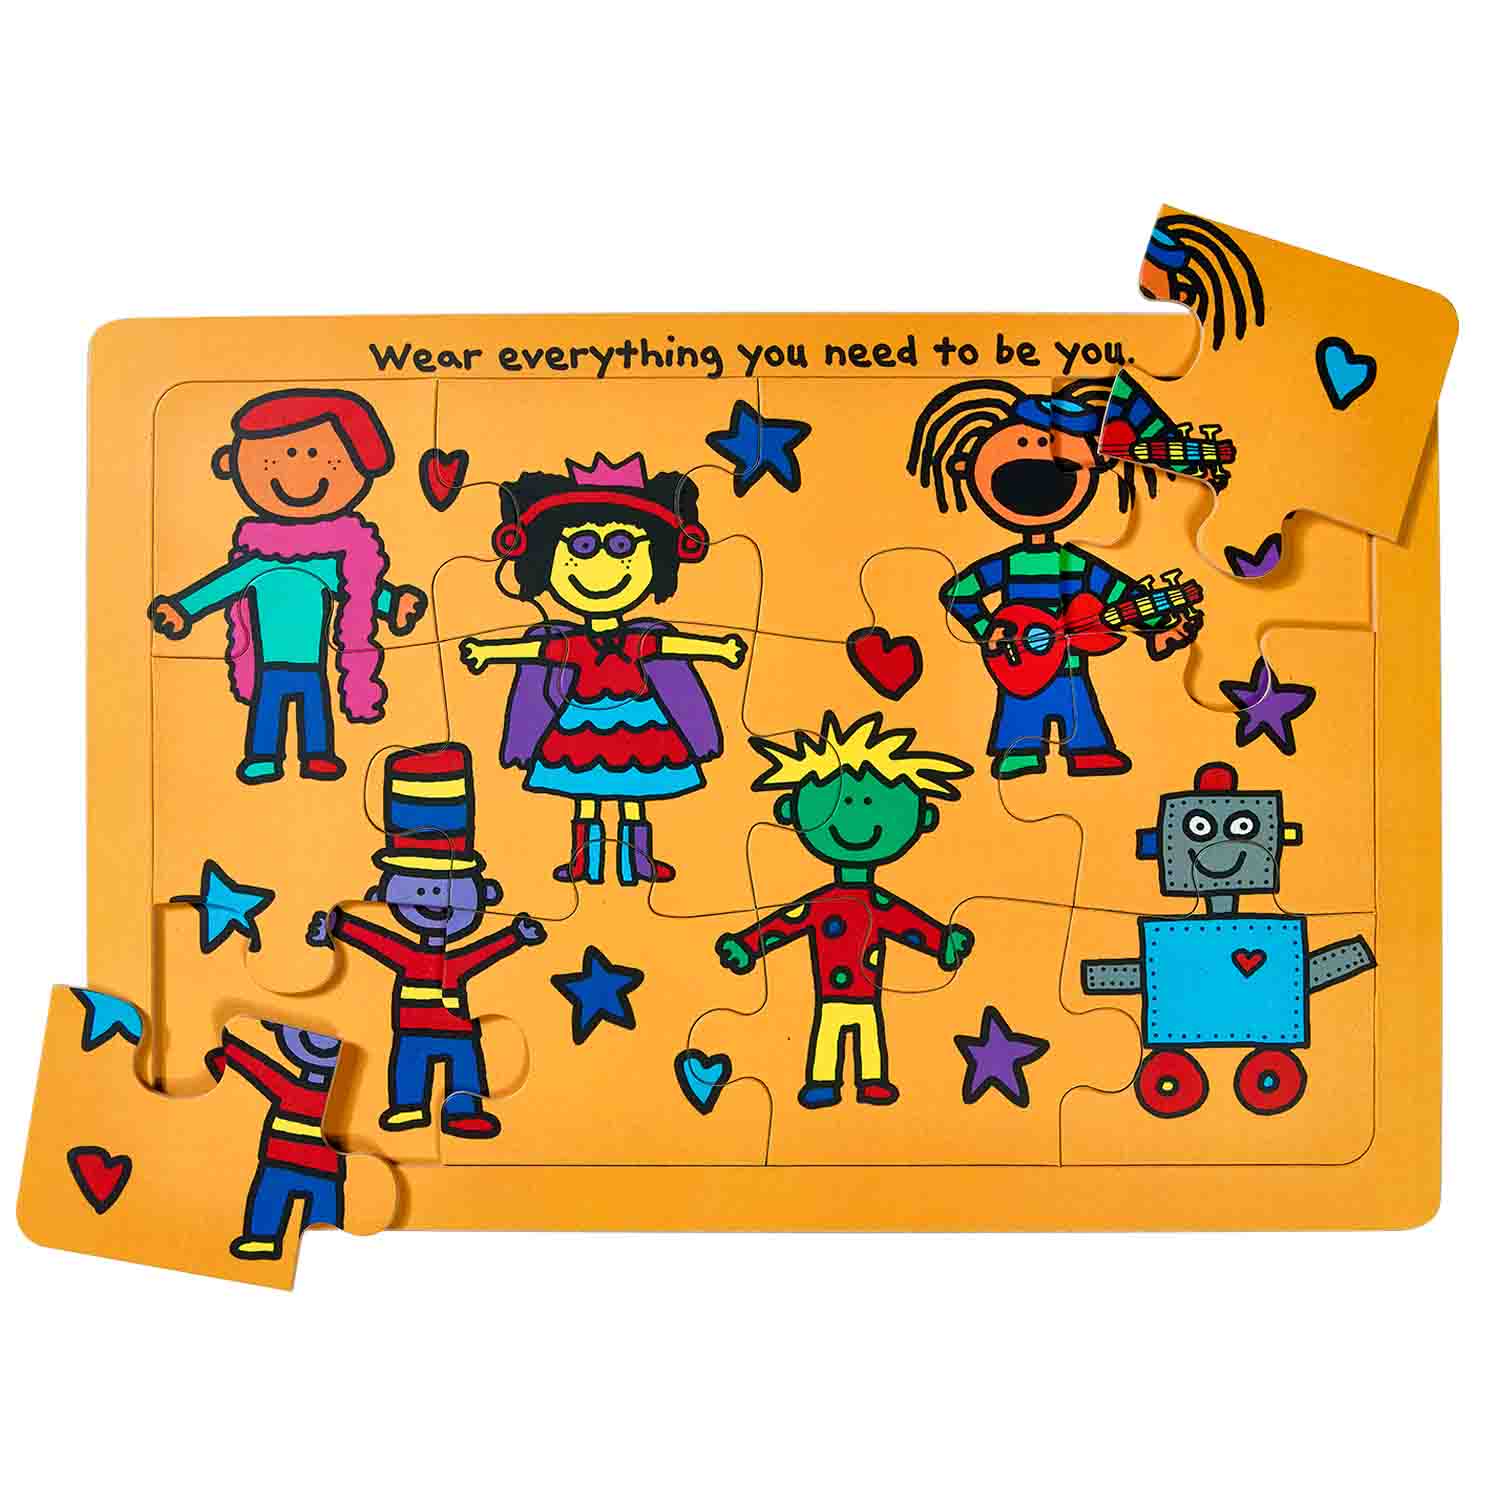 Becker's Todd Parr Be Who You Are Puzzle Set